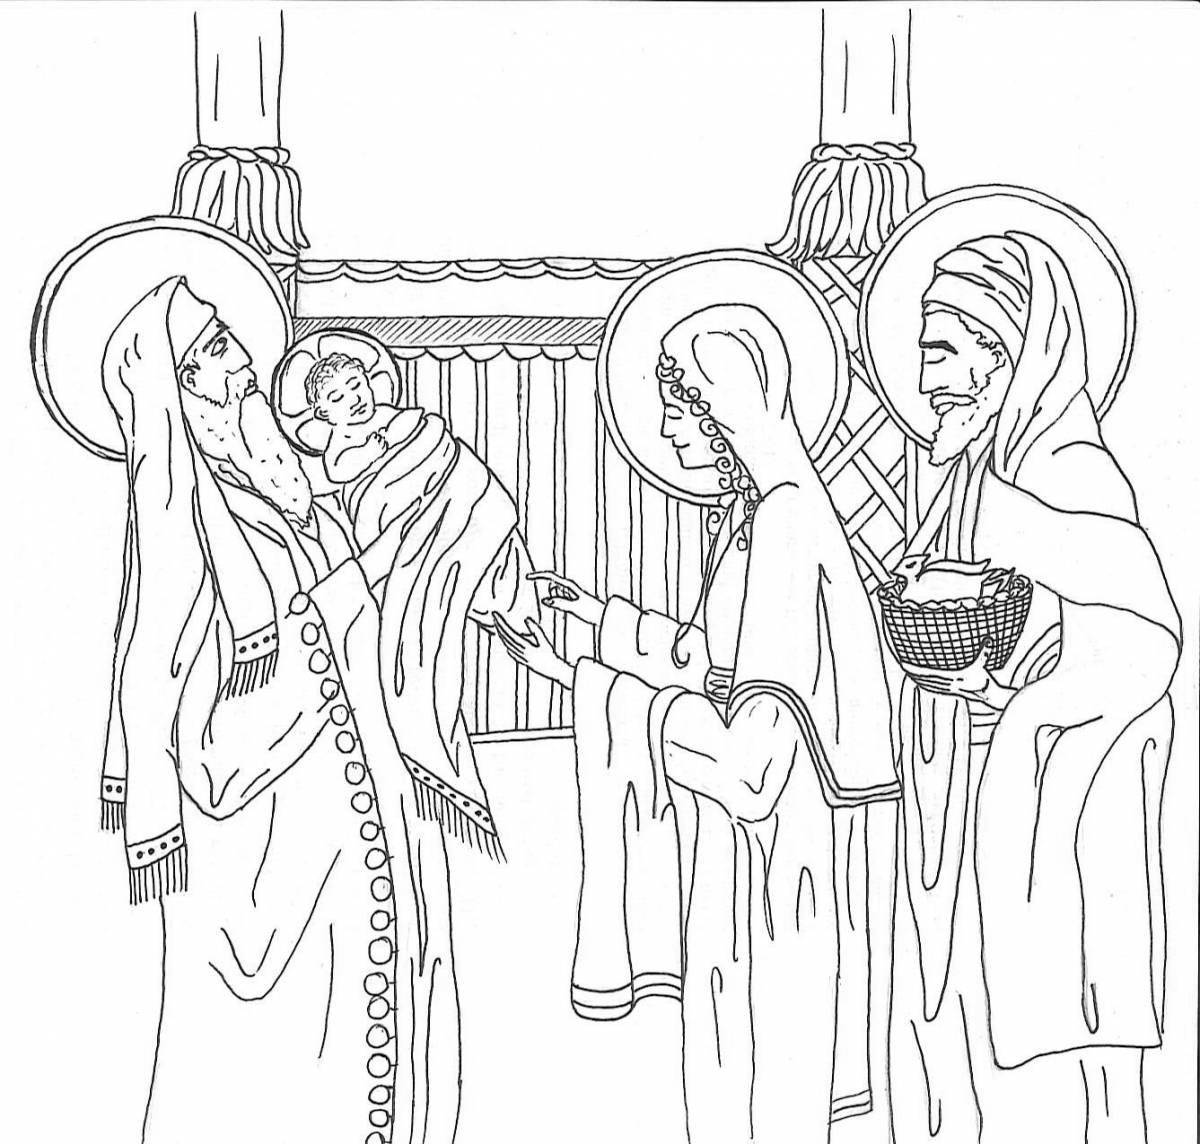 Coloring page brilliant meeting of the Lord